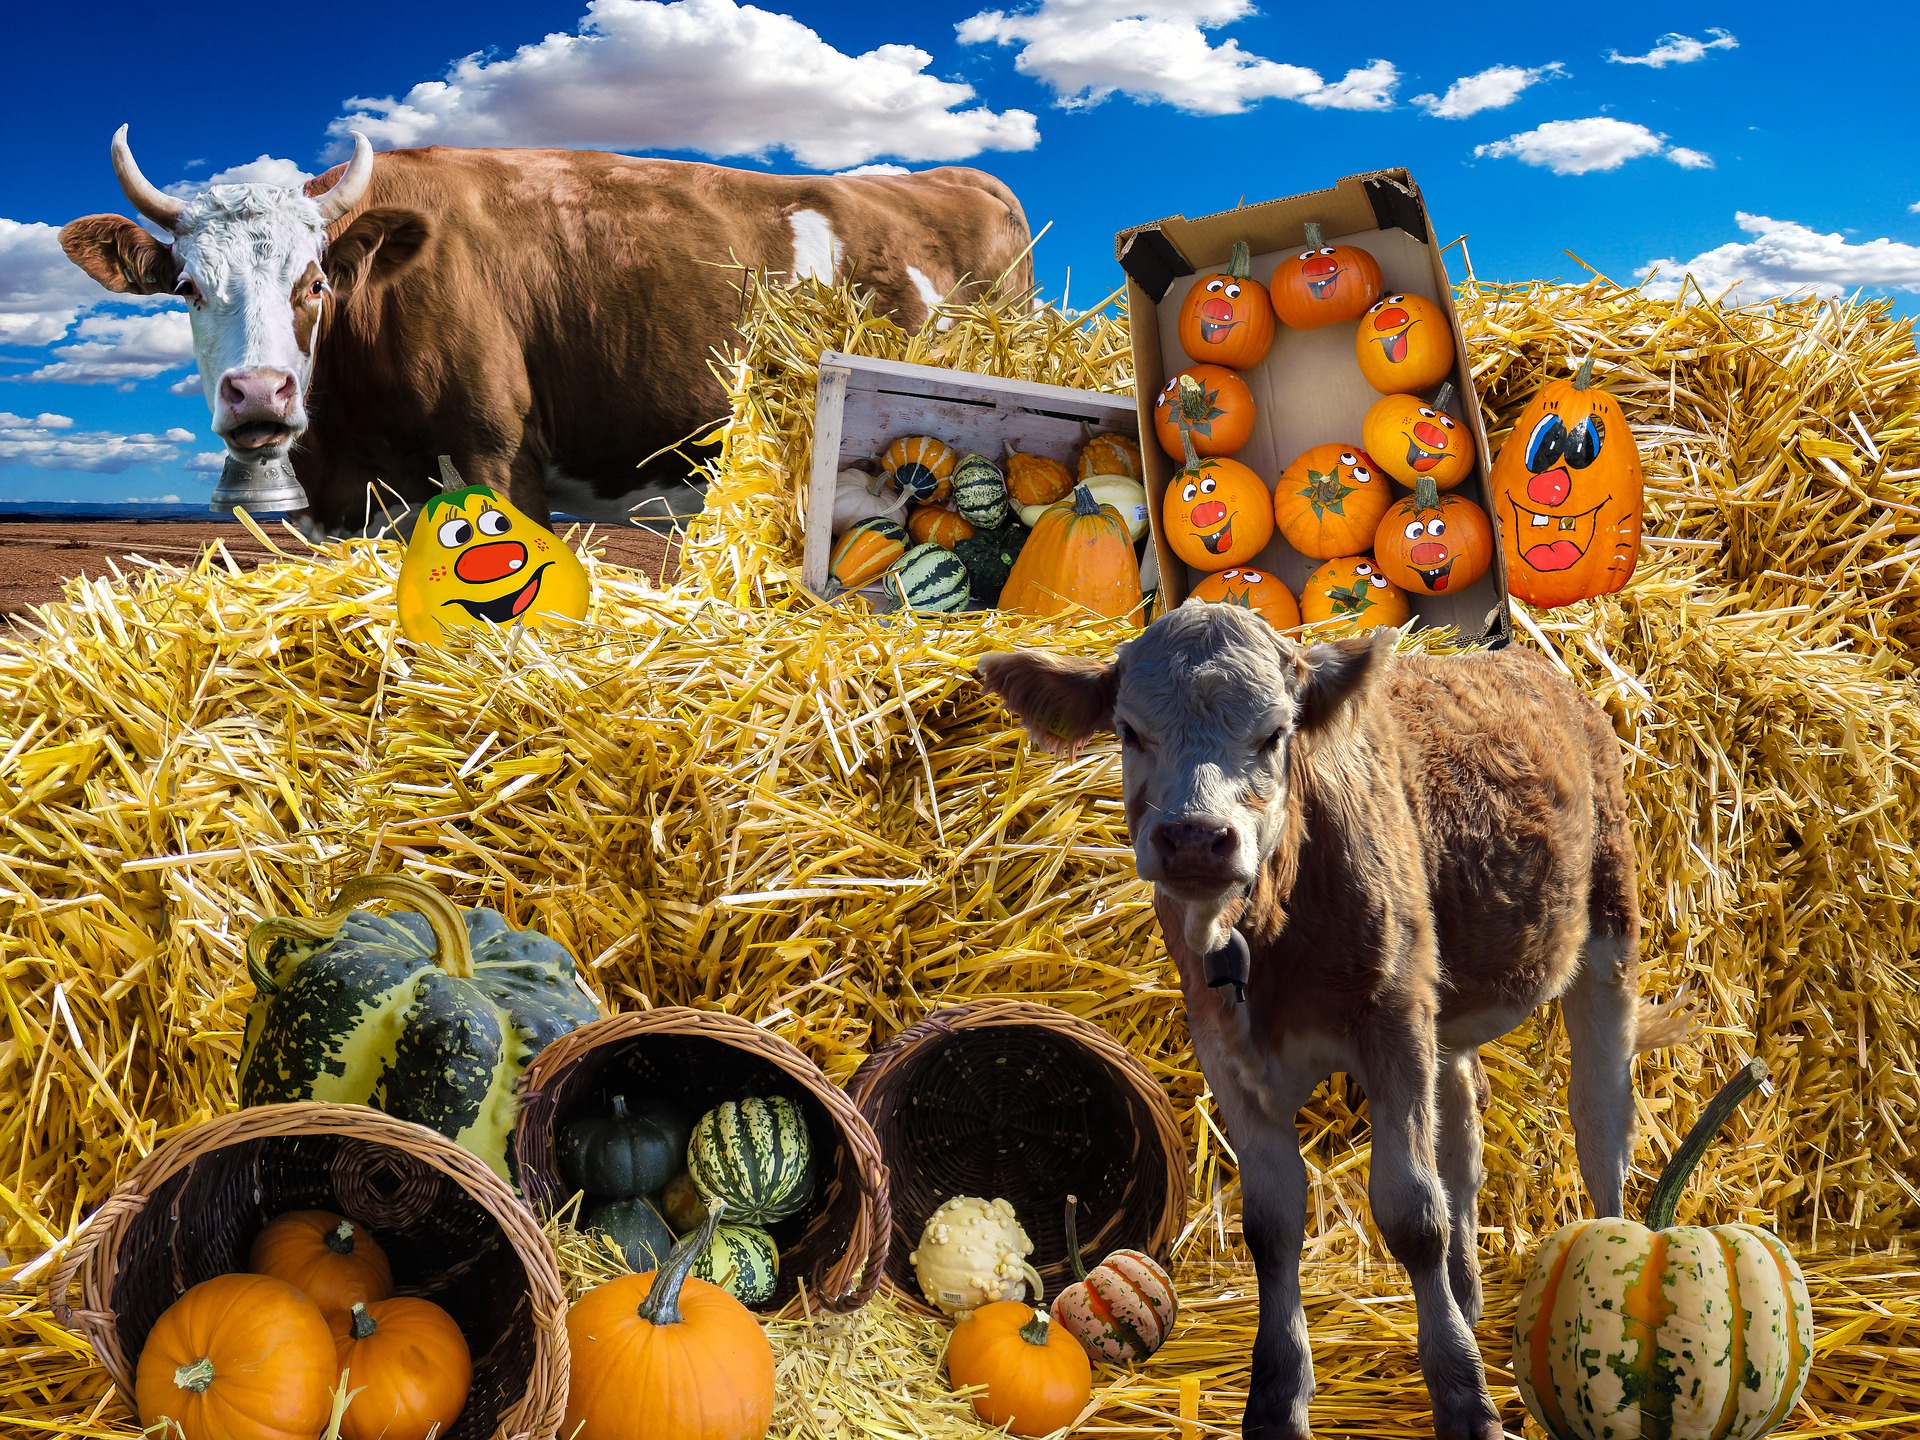 Free photo: Pumpkin, Straw Bales and Cows, Bale, Cow